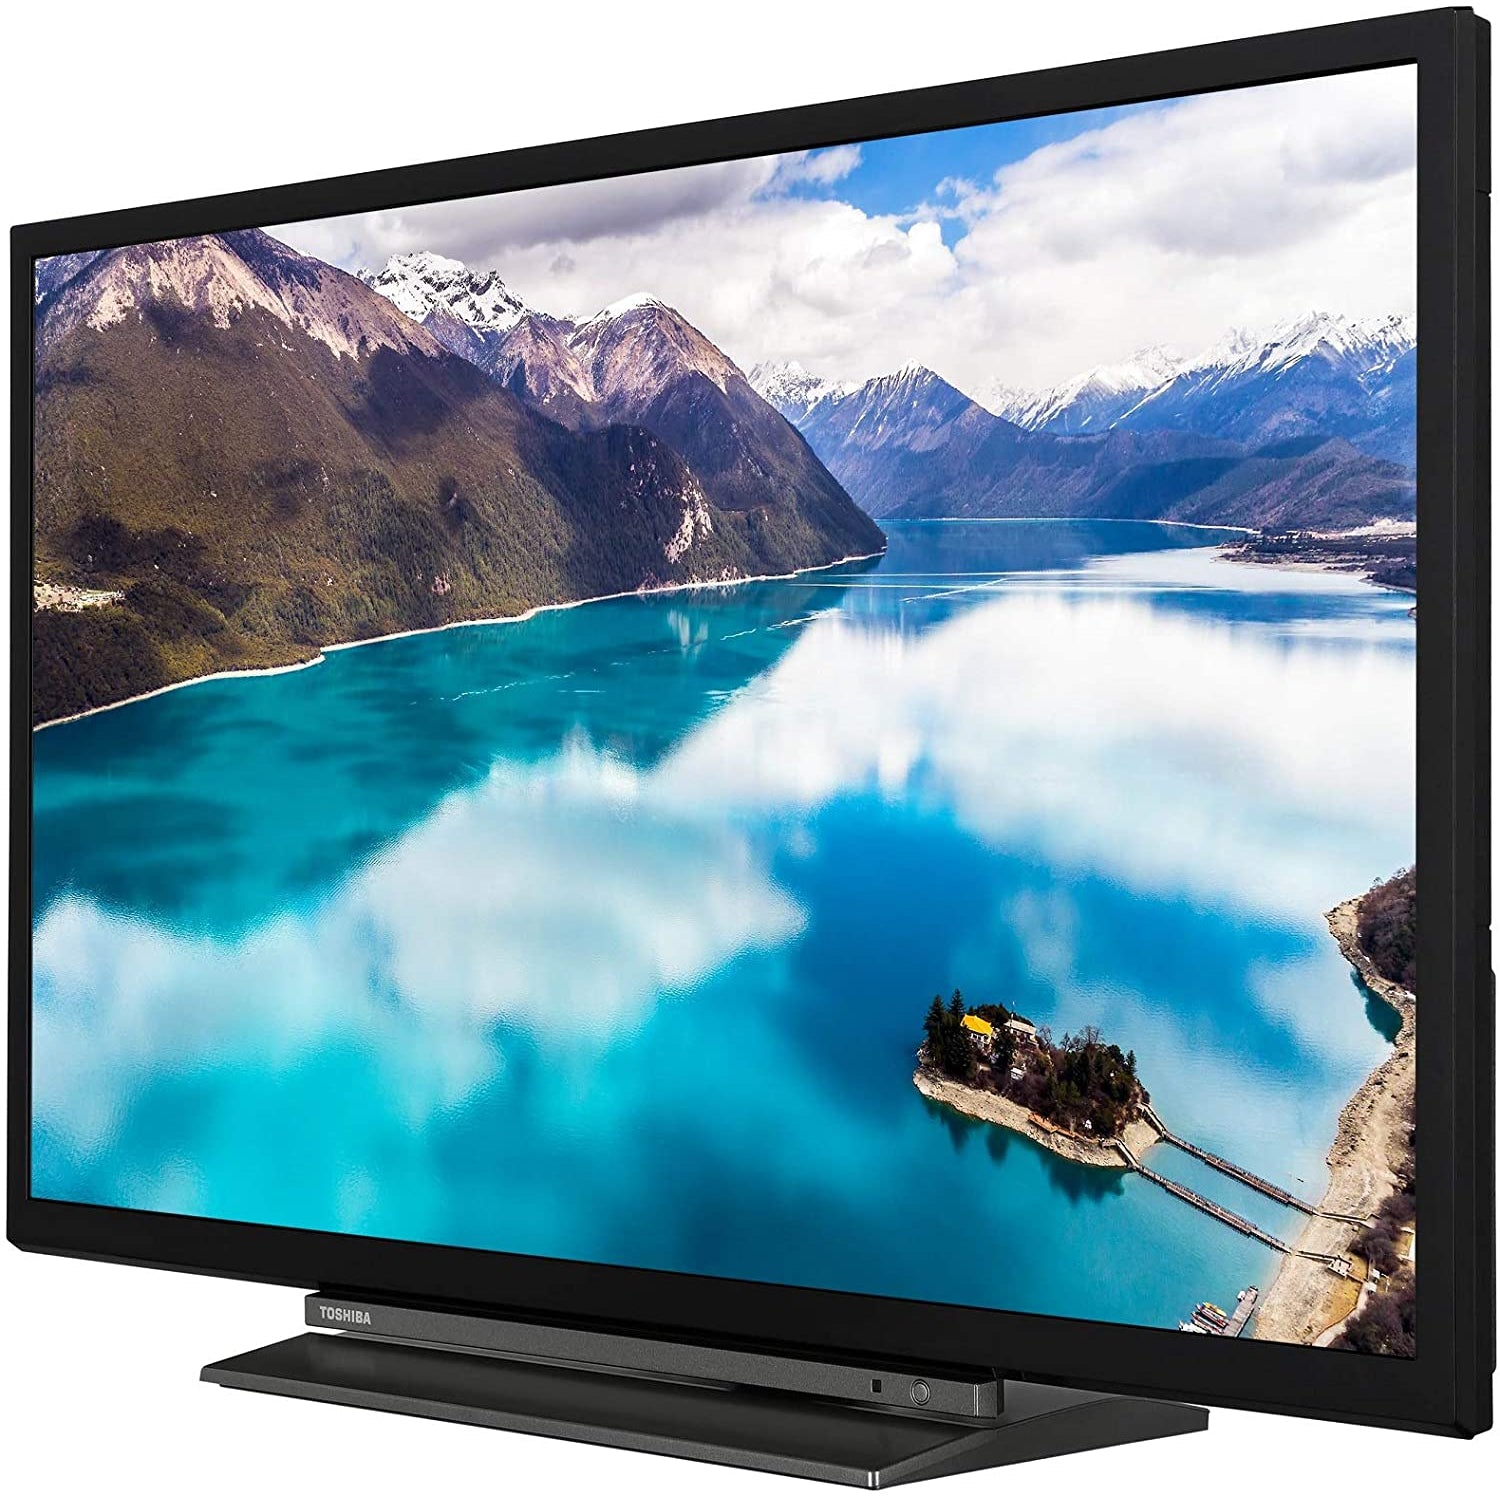 Toshiba 32LL3A63DB 32-Inch Smart Full-HD LED TV with Freeview Play - Black - Grade A